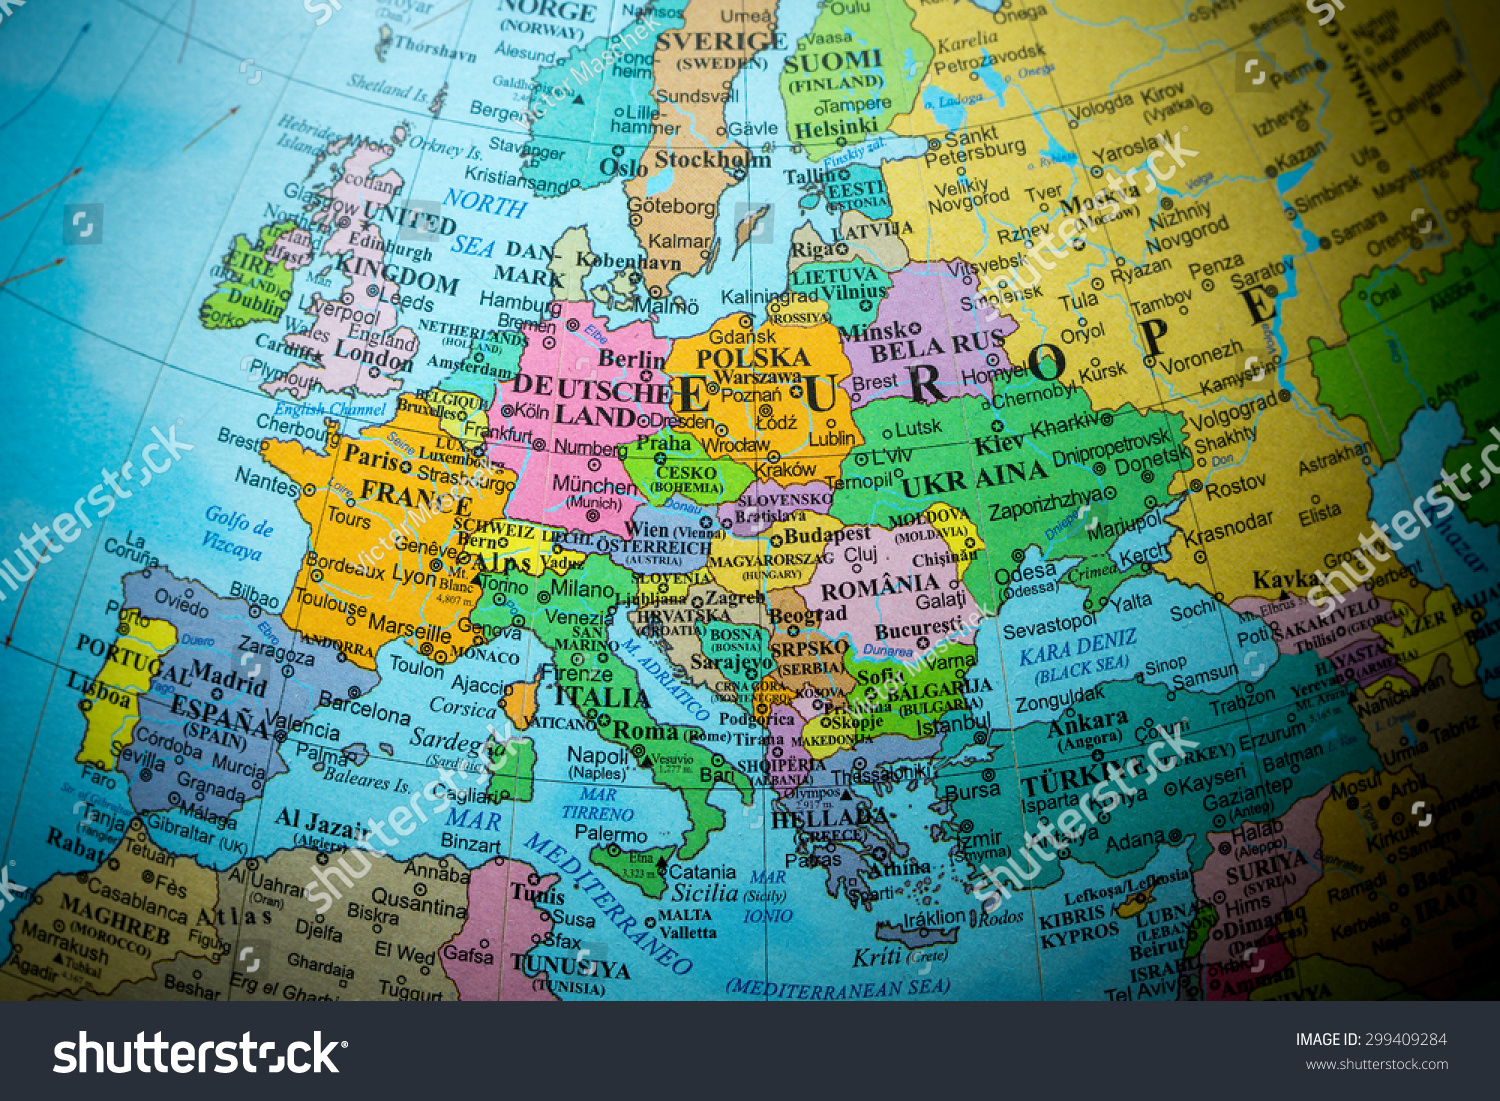 Map view of Europe on a geographical globe (vignette). #299409284